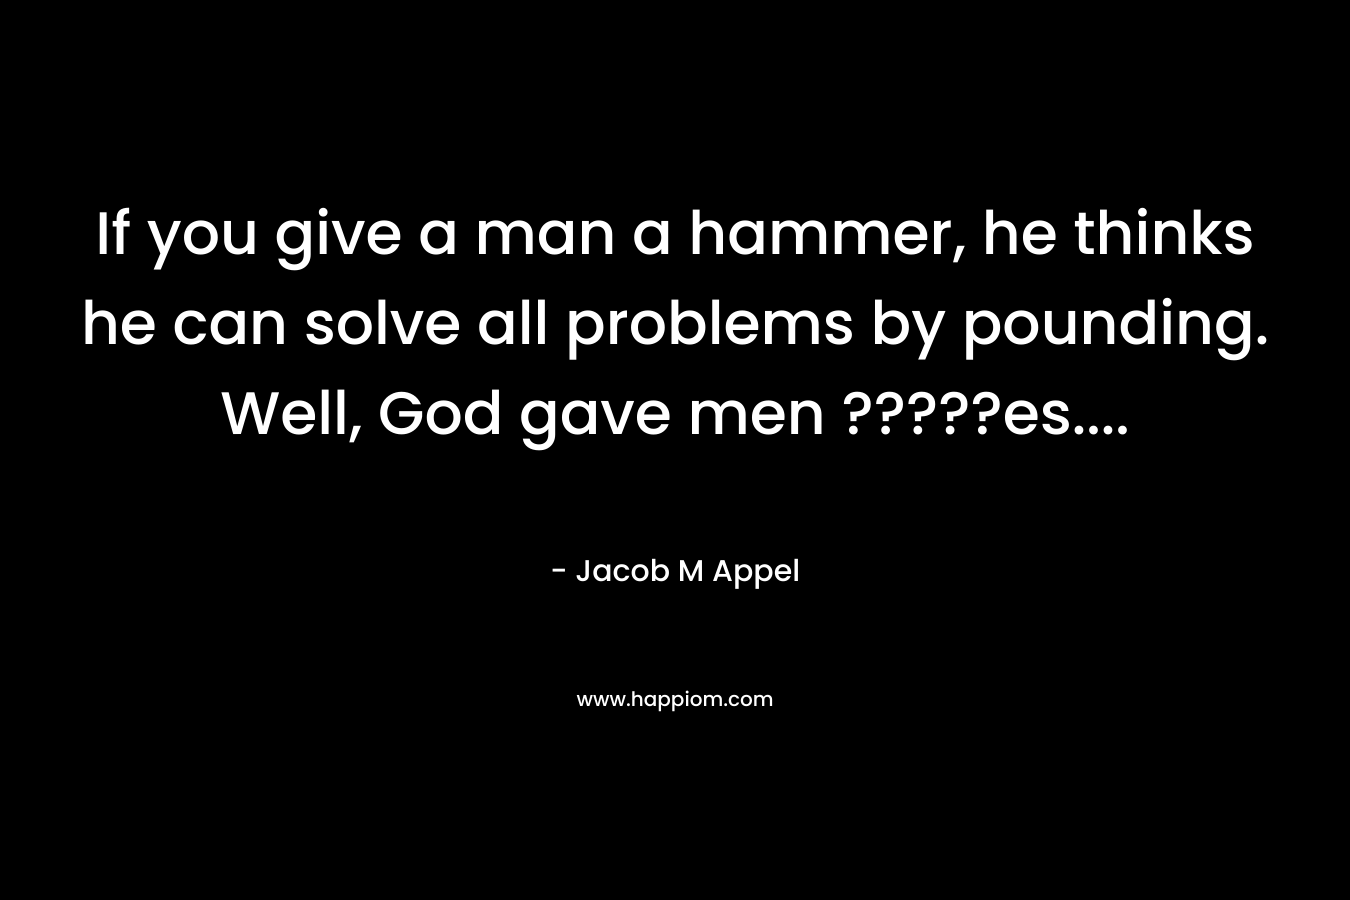 If you give a man a hammer, he thinks he can solve all problems by pounding. Well, God gave men ?????es…. – Jacob M Appel